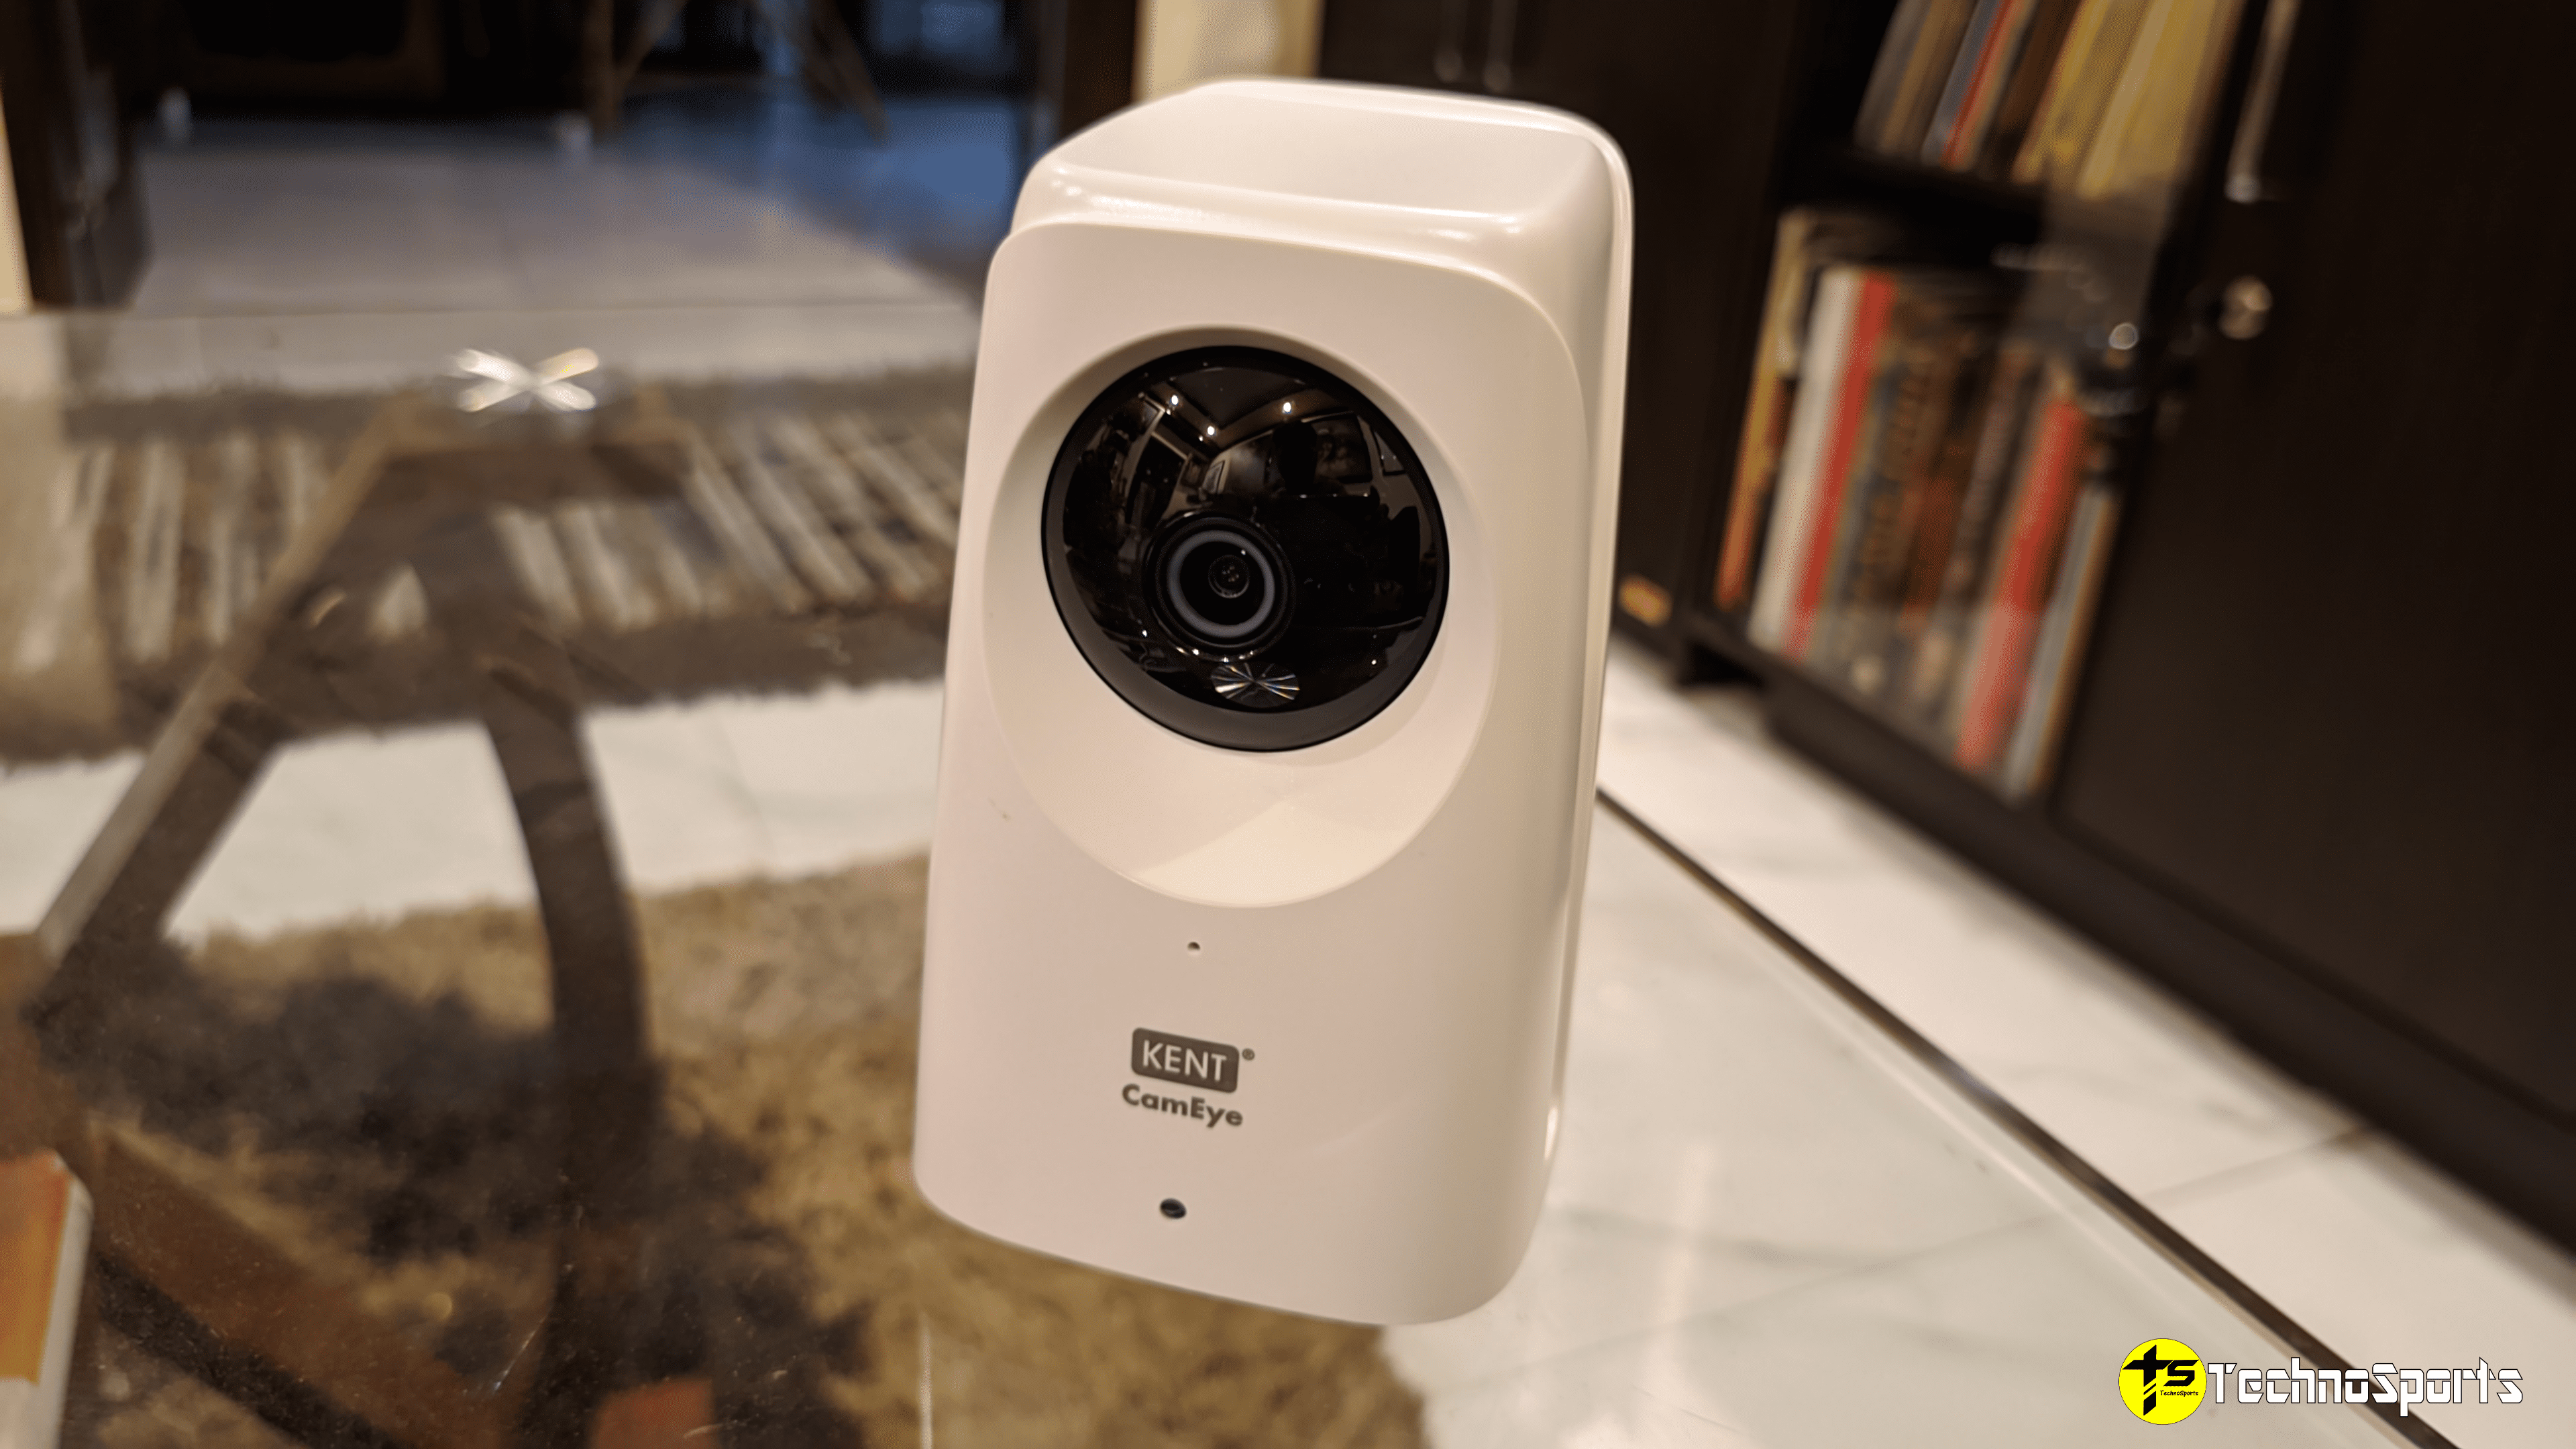 Kent HomeCam 360 Review 3 TechnoSports.co .in Kent HomeCam 360 Review: A Must Recommended Next-Gen Security Camera for your Home Security